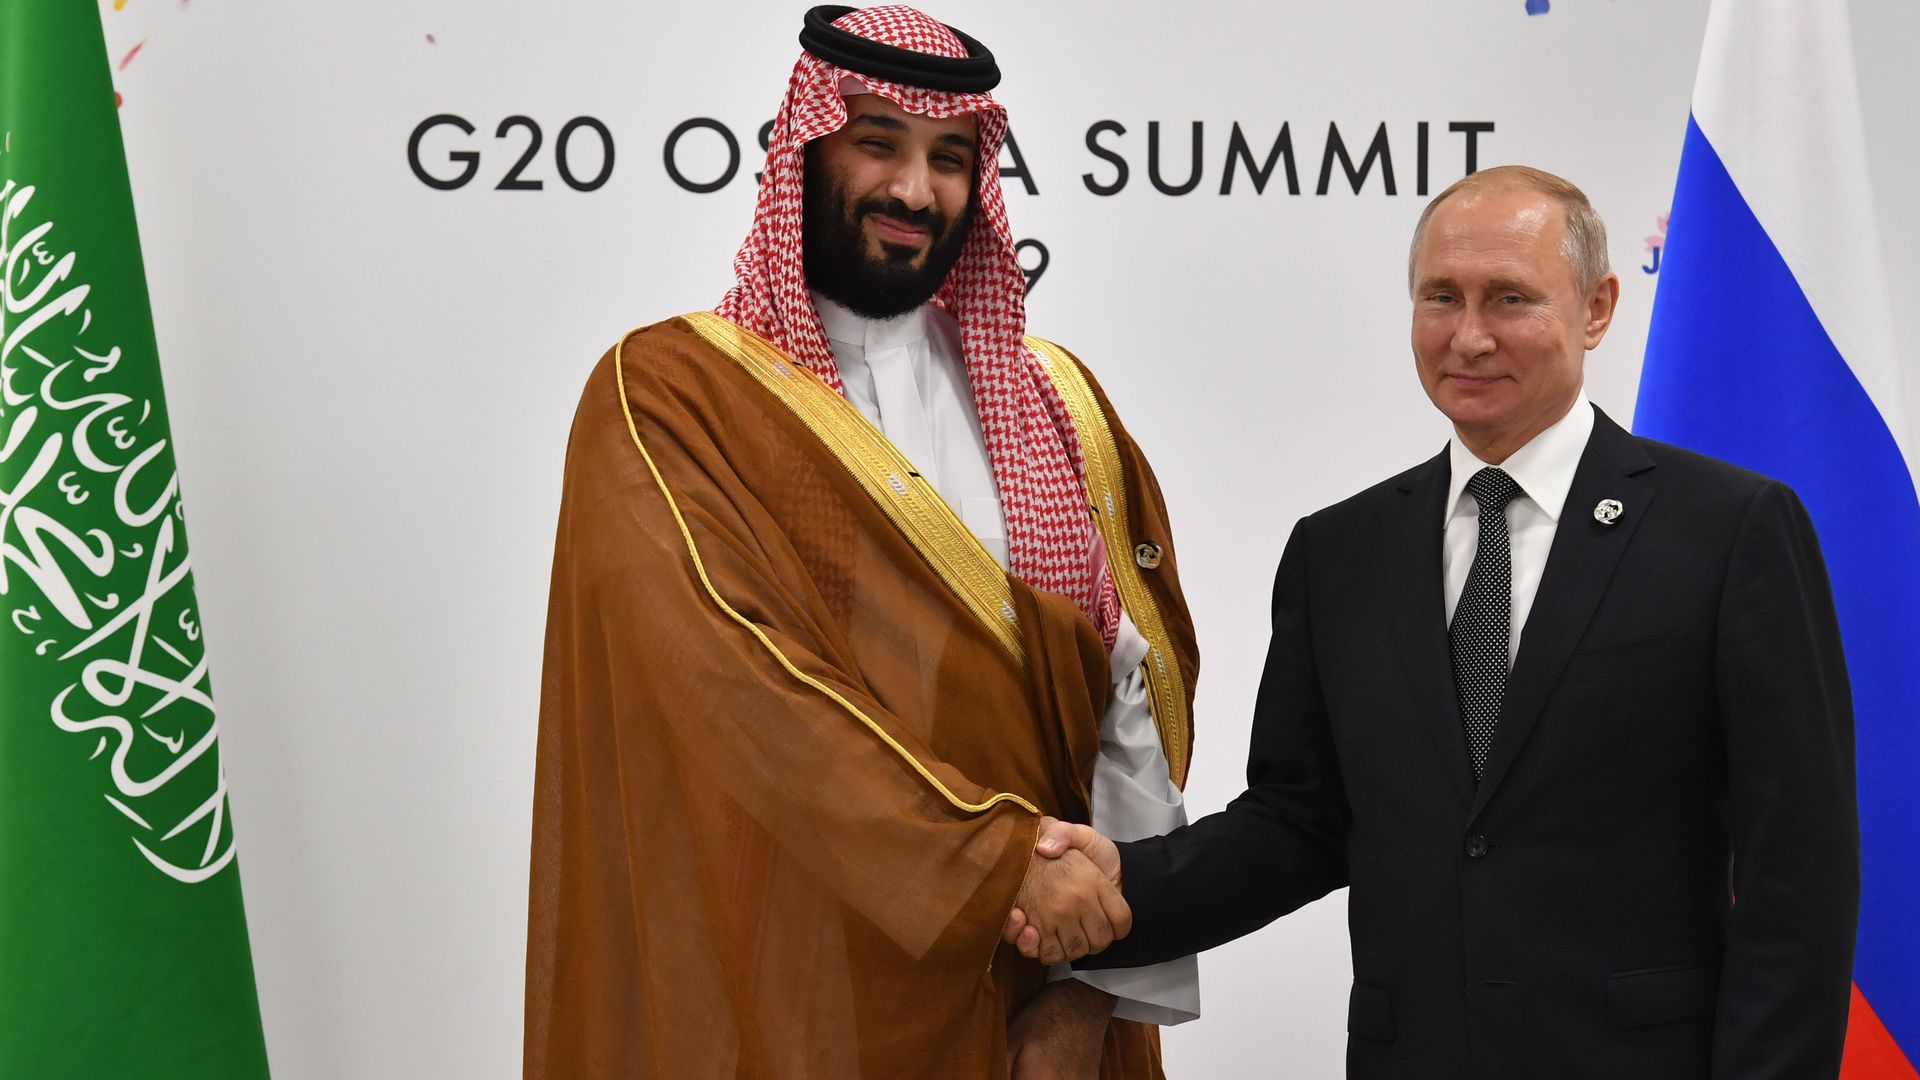 Russia's President Vladimir Putin (R) shakes hands with Saudi Arabia's Crown Prince Mohammed bin Salman during a meeting on the sidelines of the G20 Summit